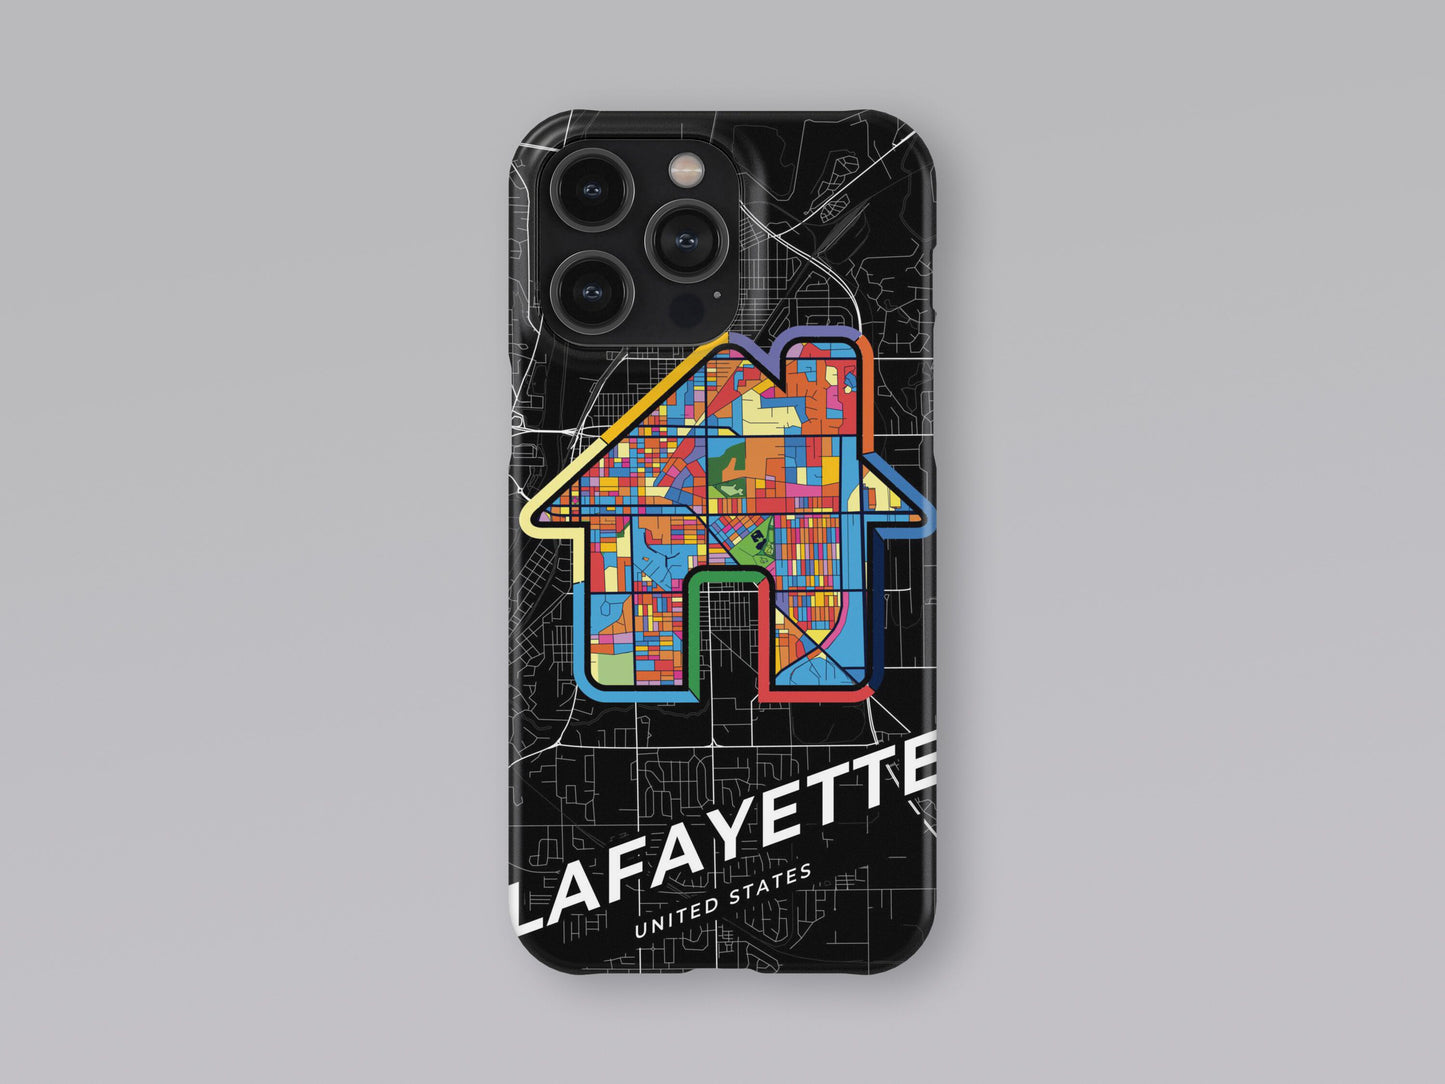 Lafayette Indiana slim phone case with colorful icon. Birthday, wedding or housewarming gift. Couple match cases. 3